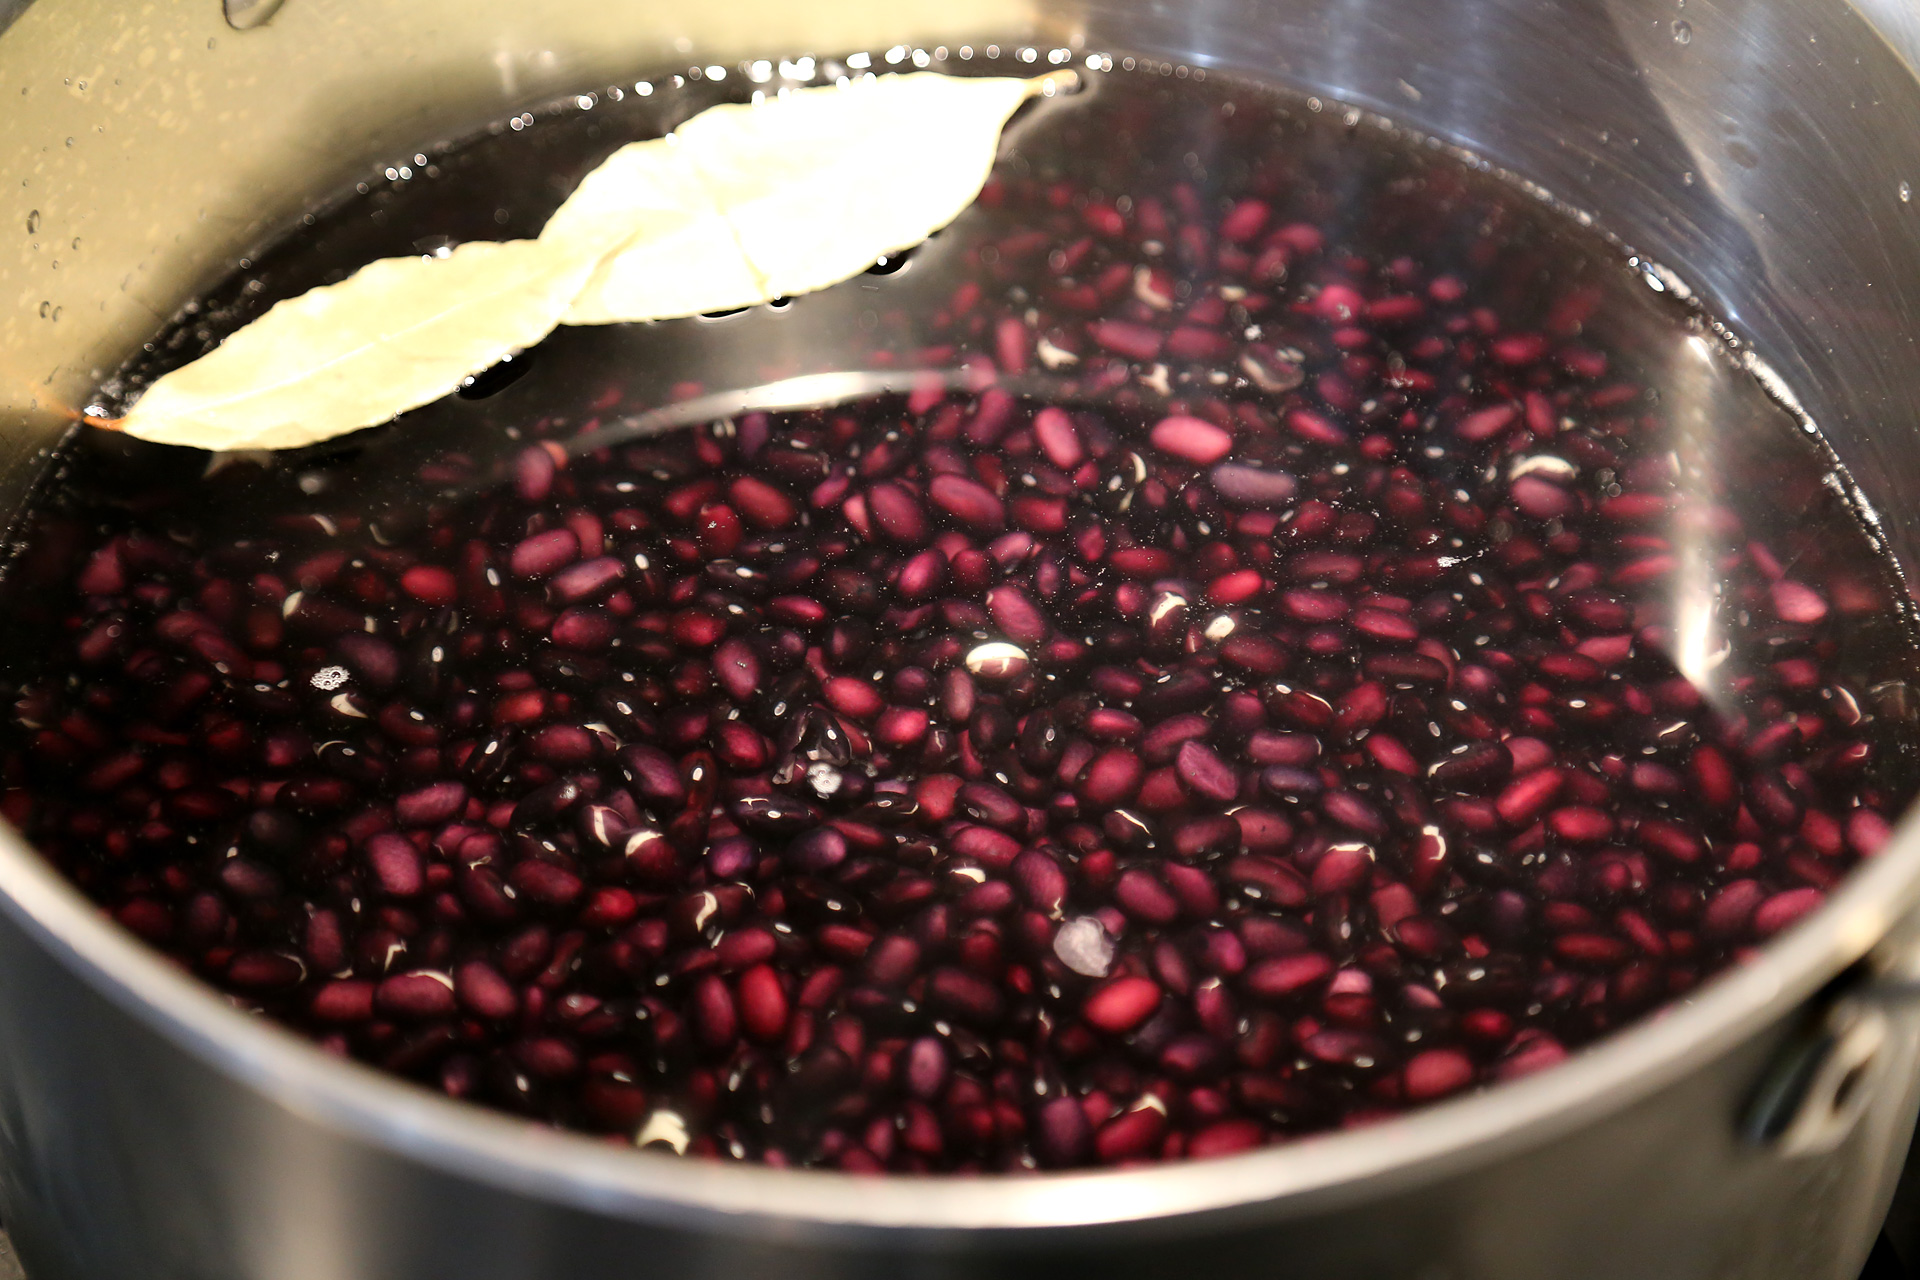 Add the beans, garlic cloves, and bay leaves to a large, heavy saucepan or pot and add cool water to cover by about 1 inch. Bring to a boil over high heat, then cover partially, reduce the heat to low, and simmer, stirring occasionally, until tender.